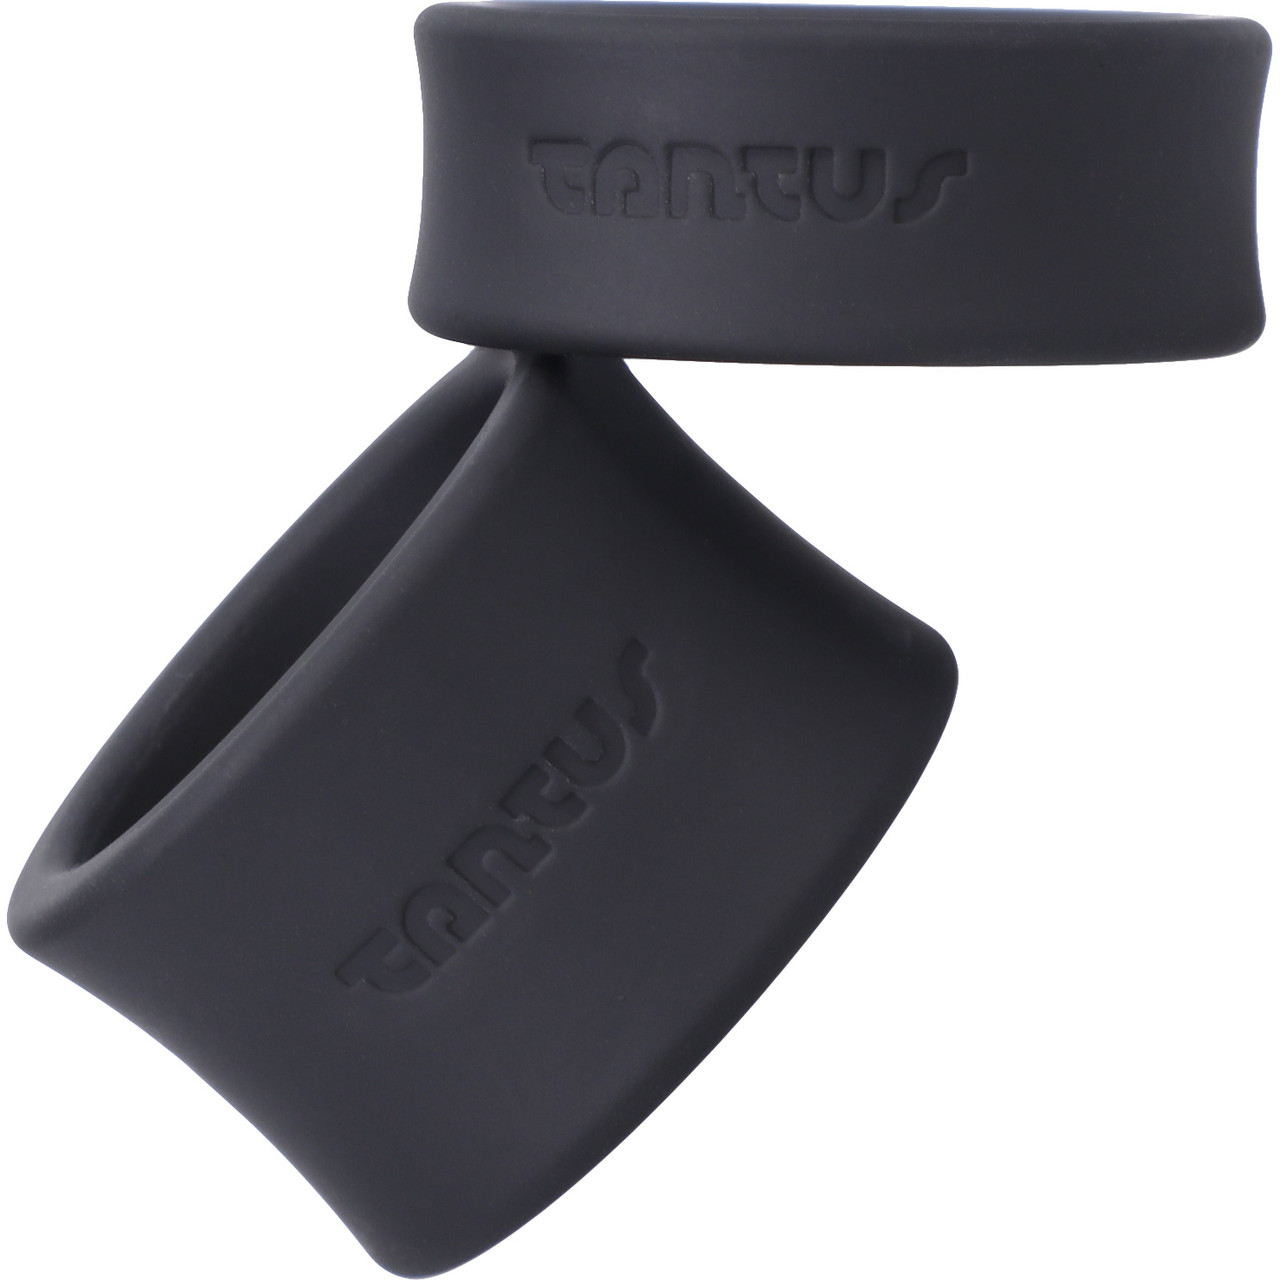 Super Soft Silicone Ball Stretcher By Tantus - Onyx